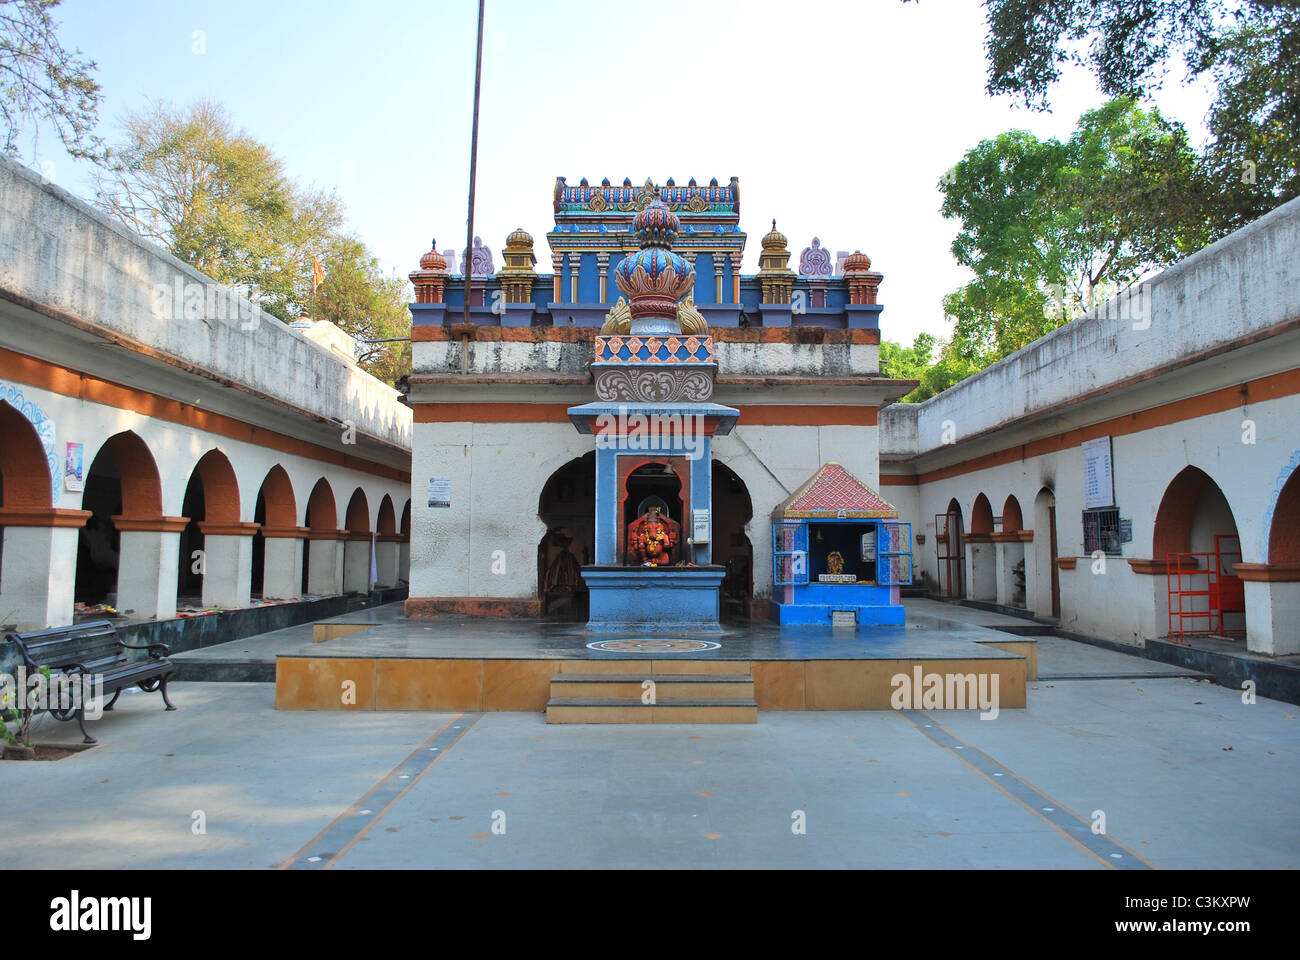 vitthal temple building Stock Photo